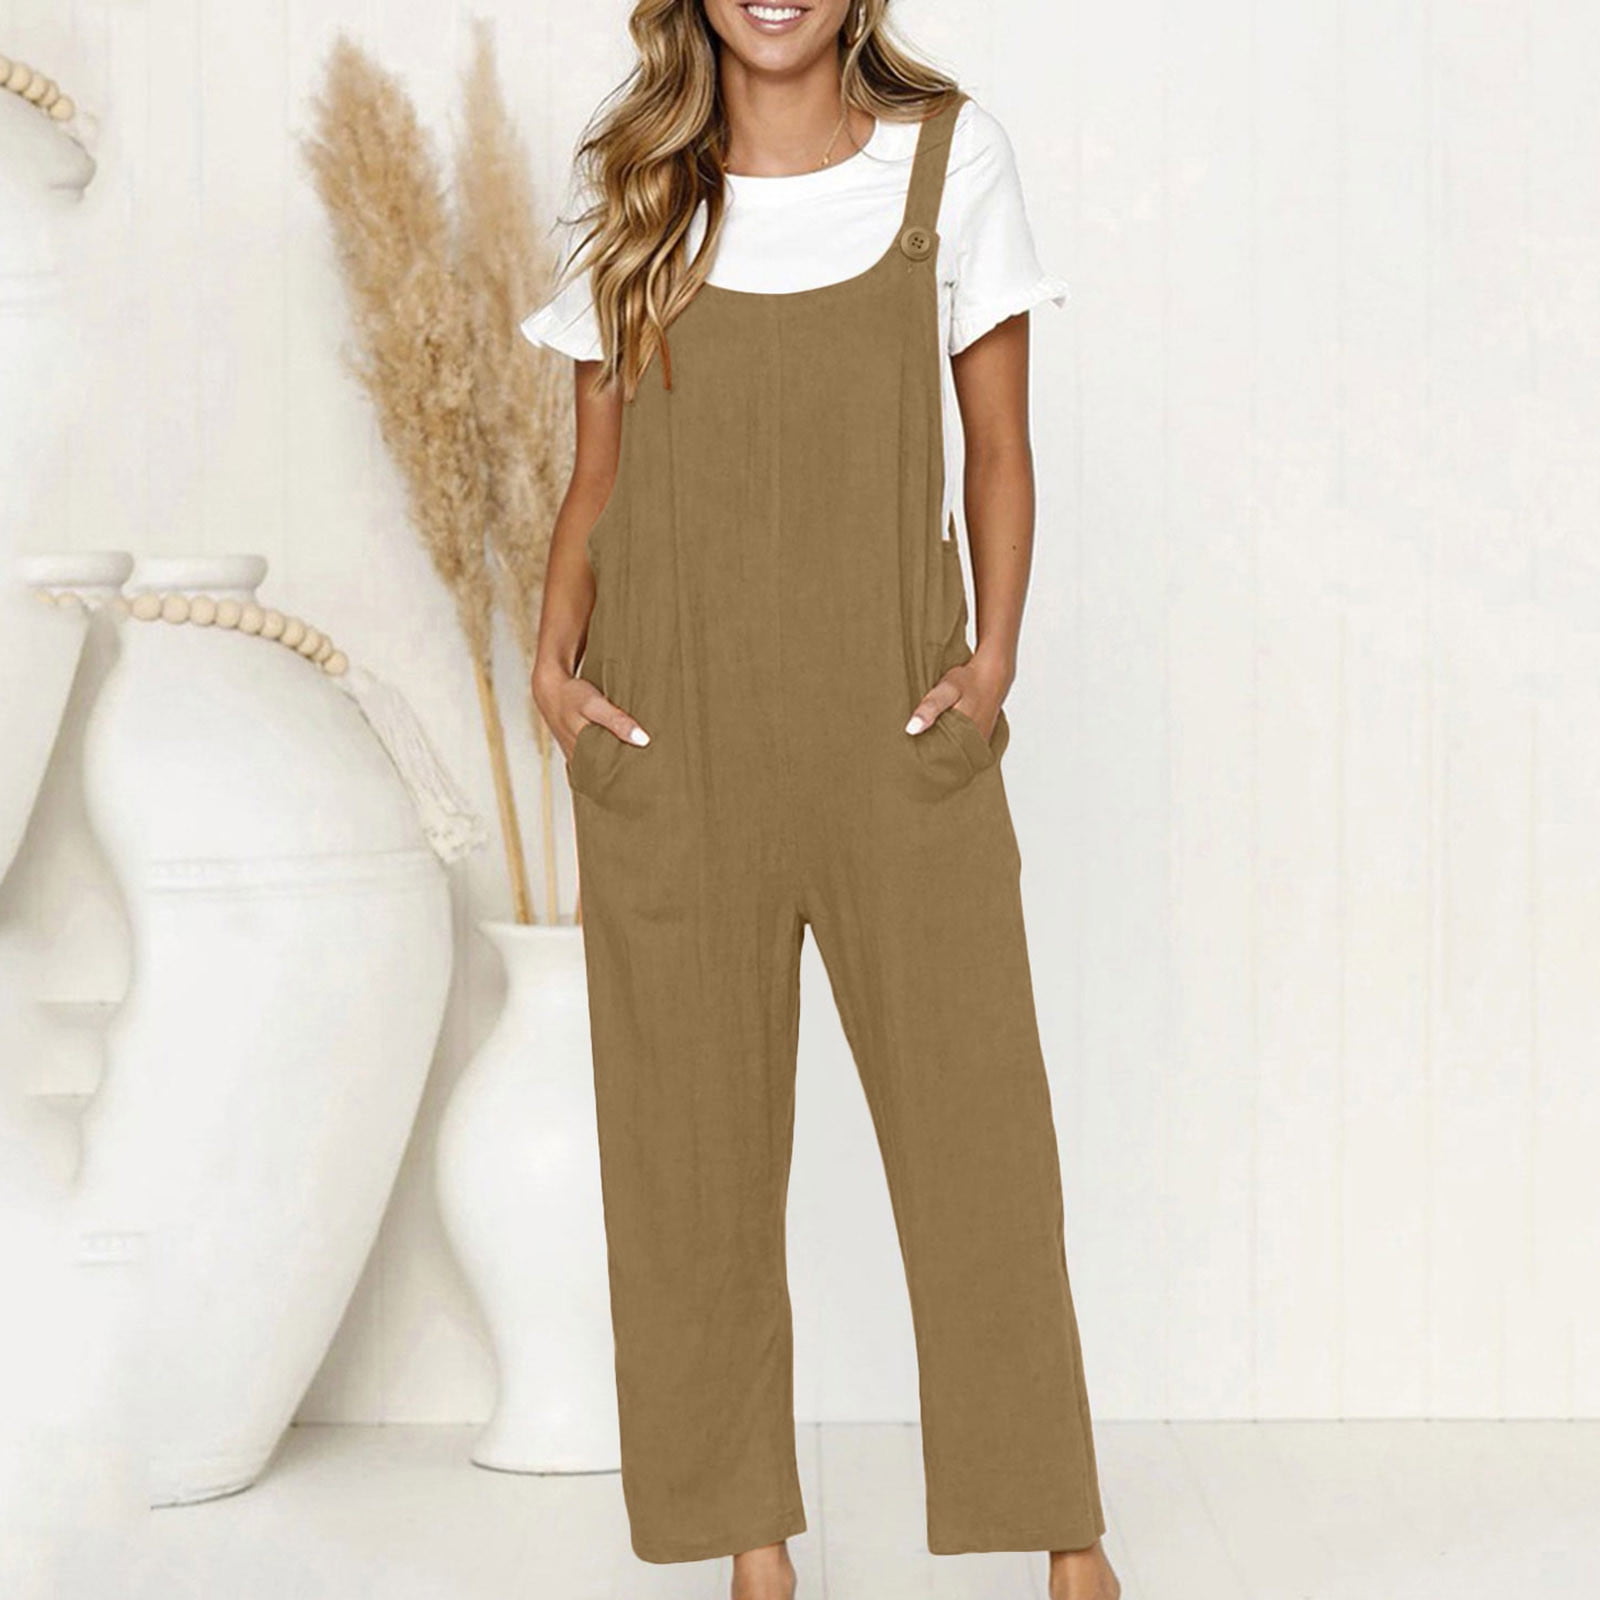 Woman Clearance In Clothes,POROPL Plus Size Overalls Casual Loose Dungarees  Romper Baggy Playsuit Cotton Linen Jumpsuit Dress Pants for Women Trendy